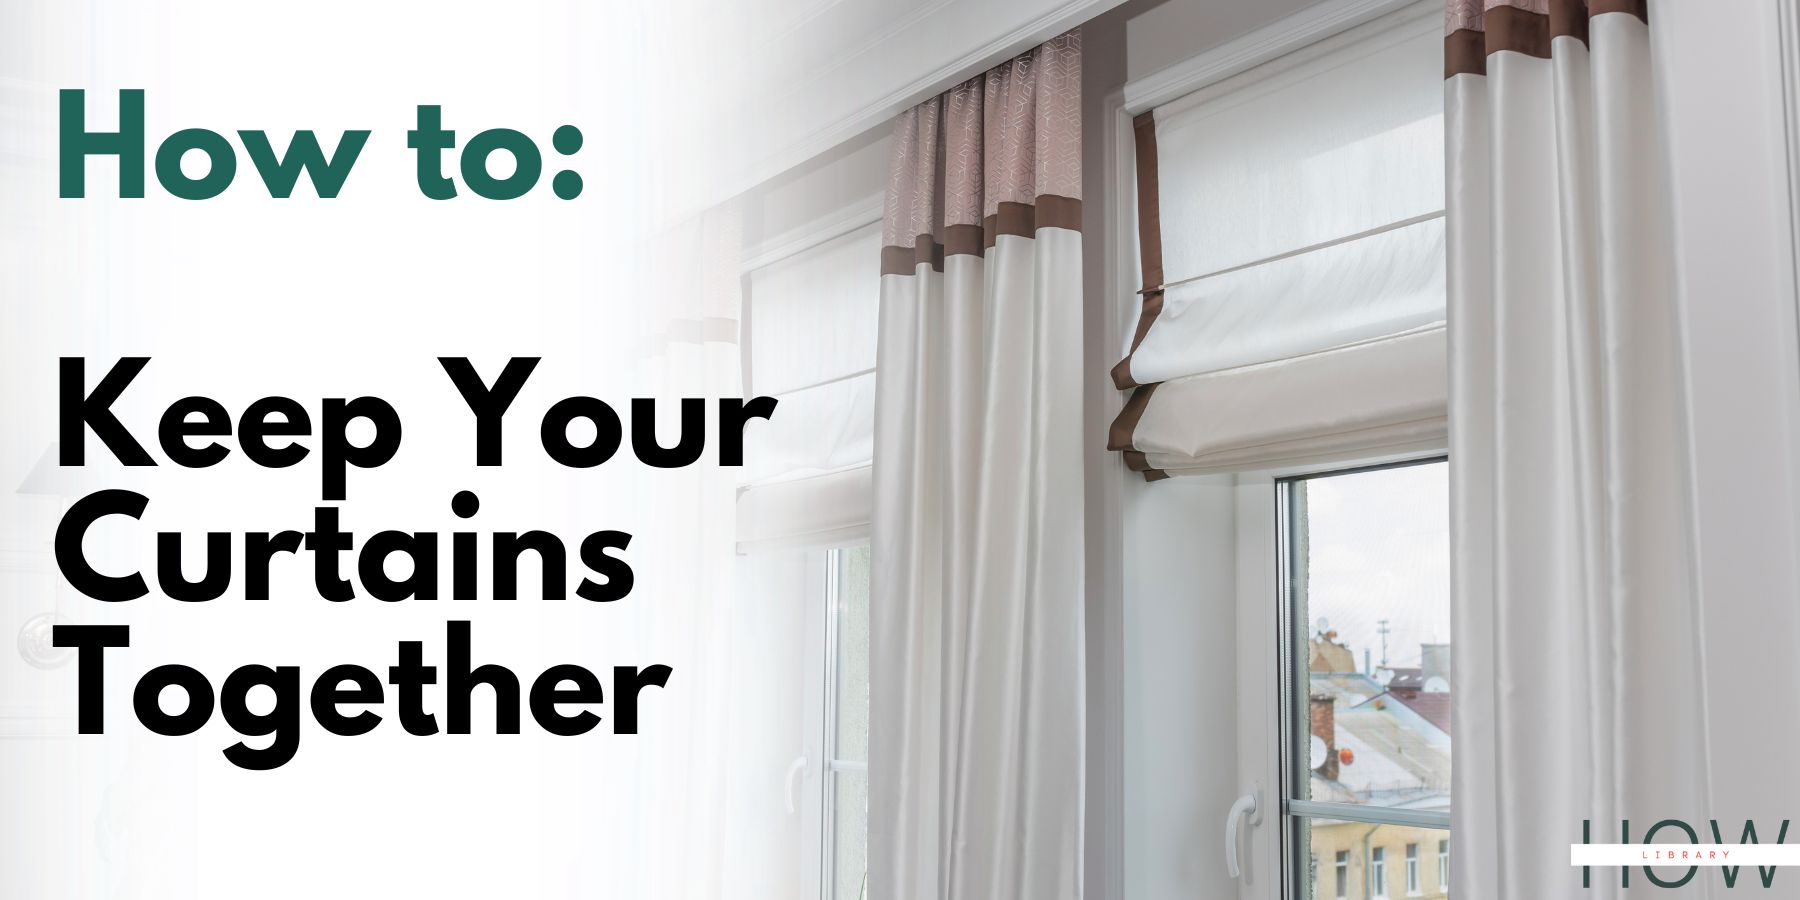 How to Keep Your Curtains Together